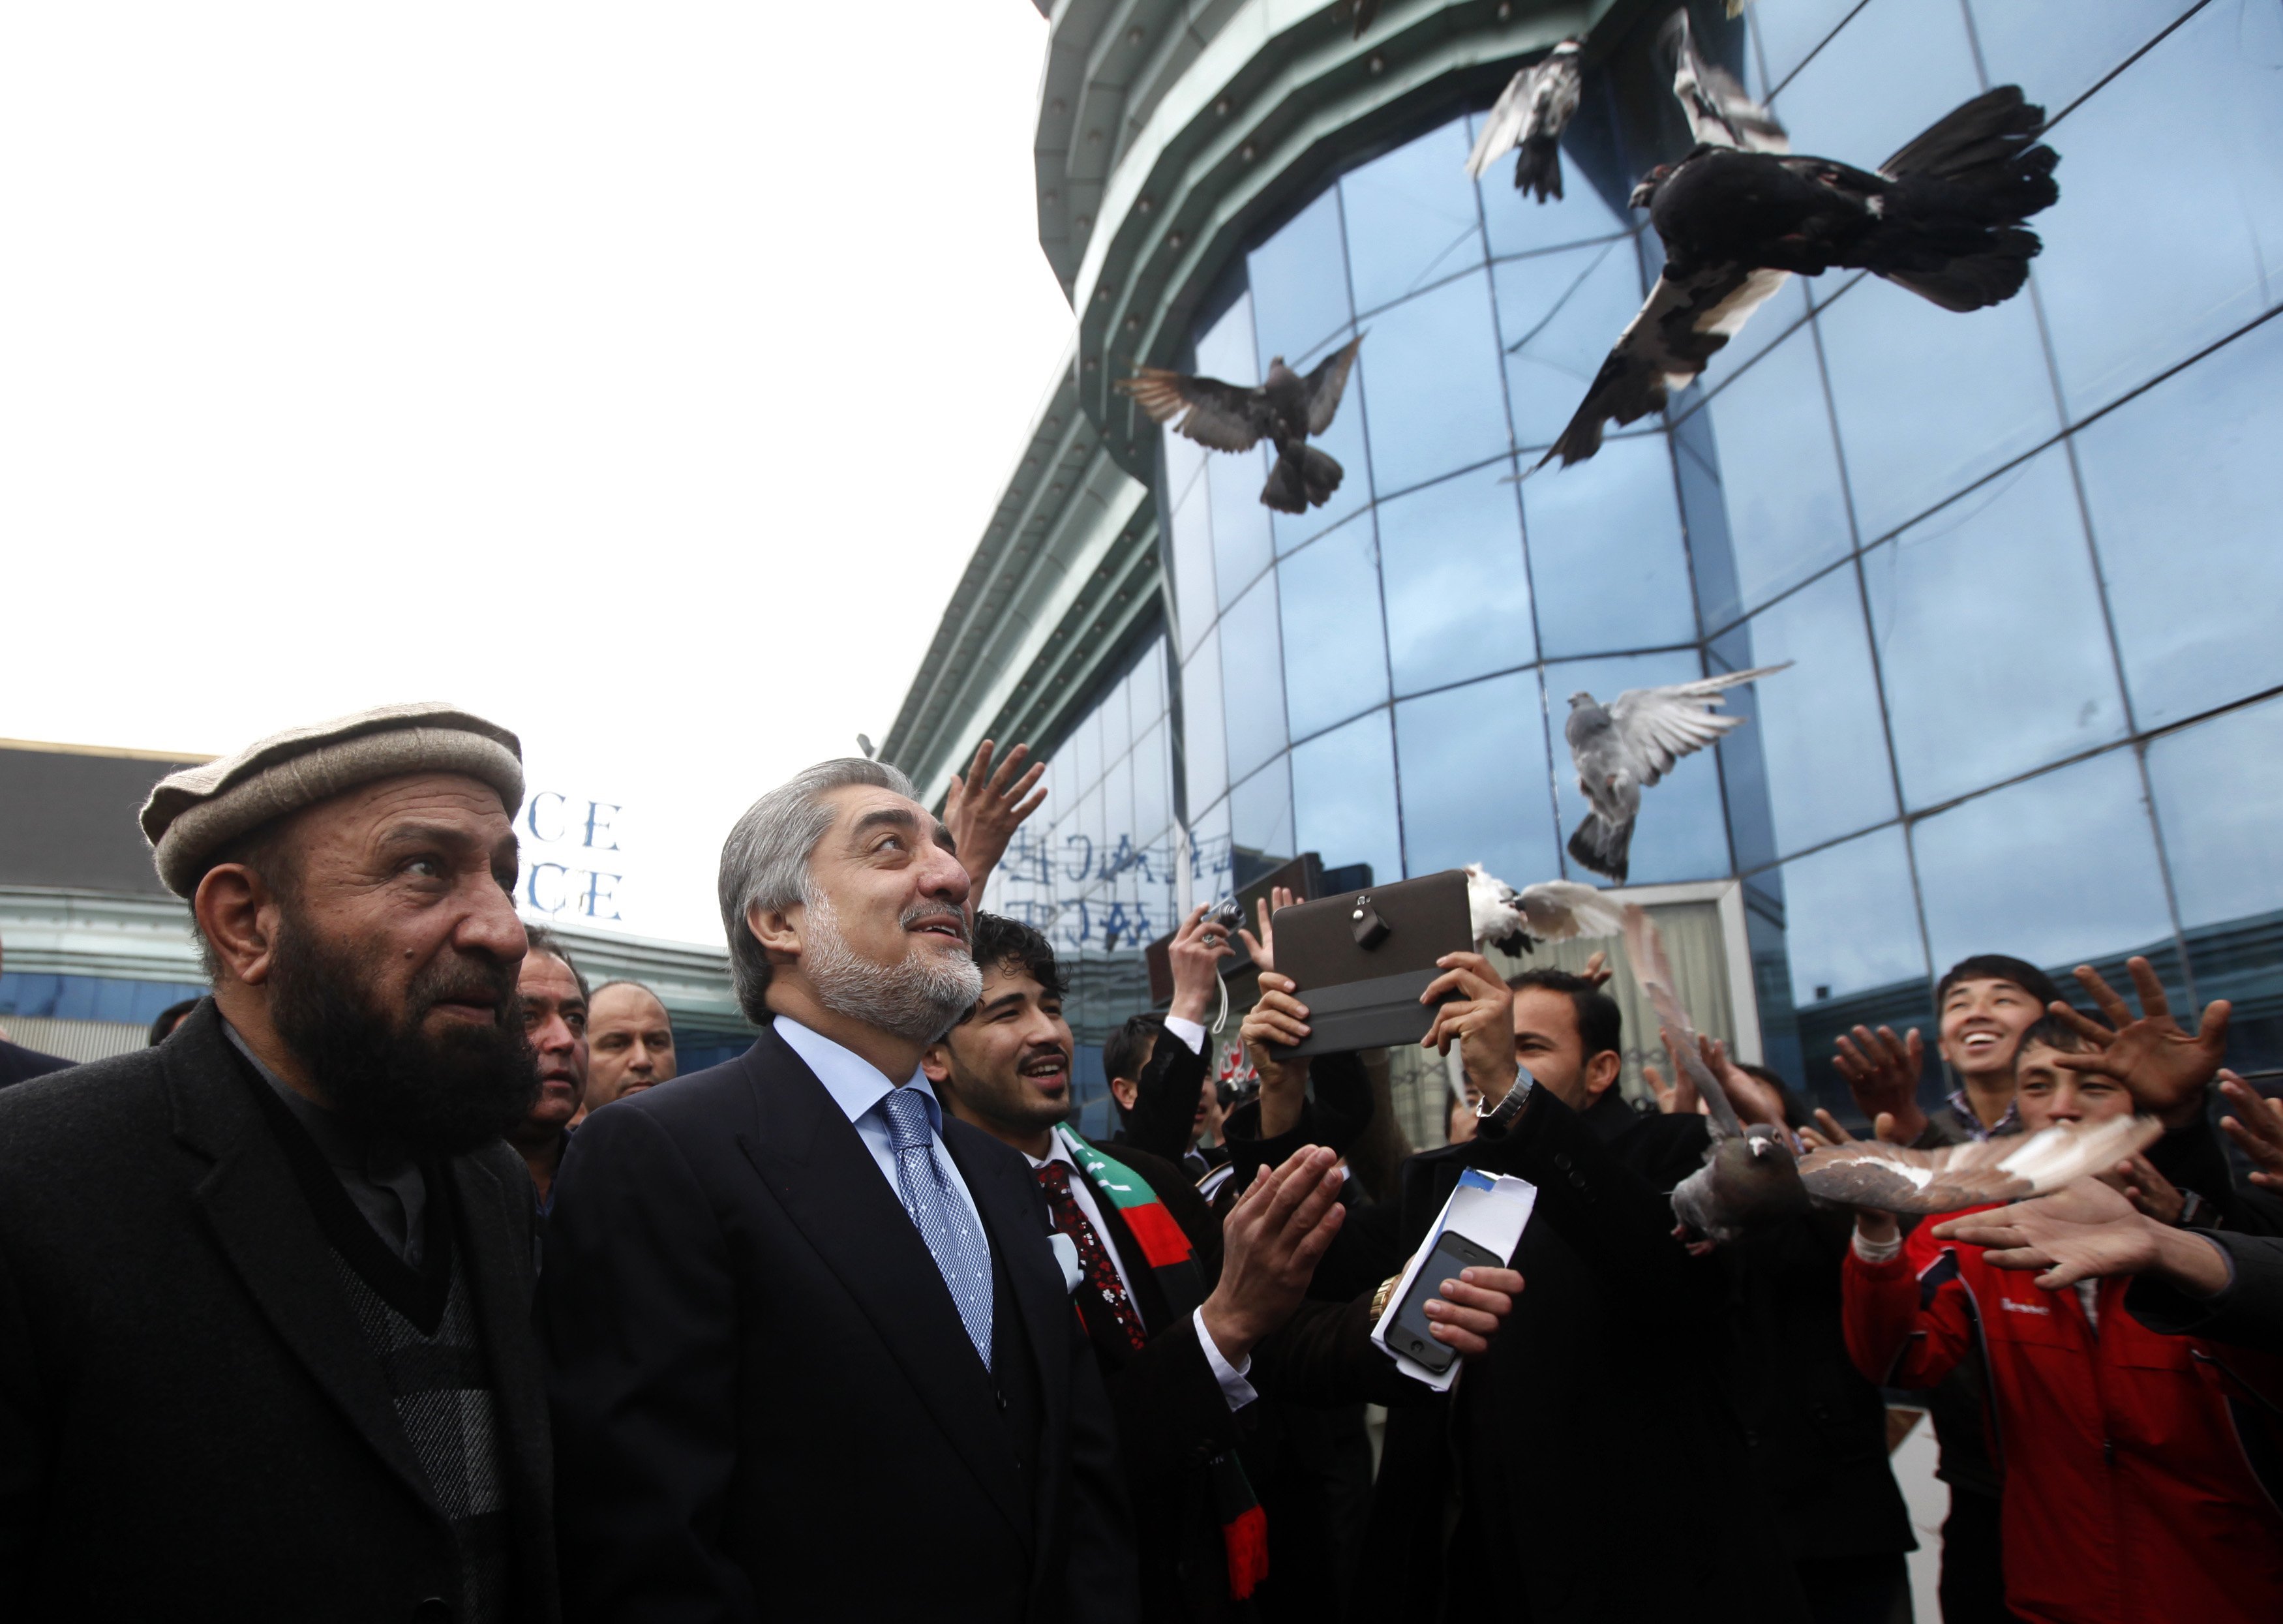 Supporters of Afghan presidential candidate Abdullah Abdullah release pigeons during the first day of the presidential election campaign in Kabul. (Mohammad Ismail / Reuters)